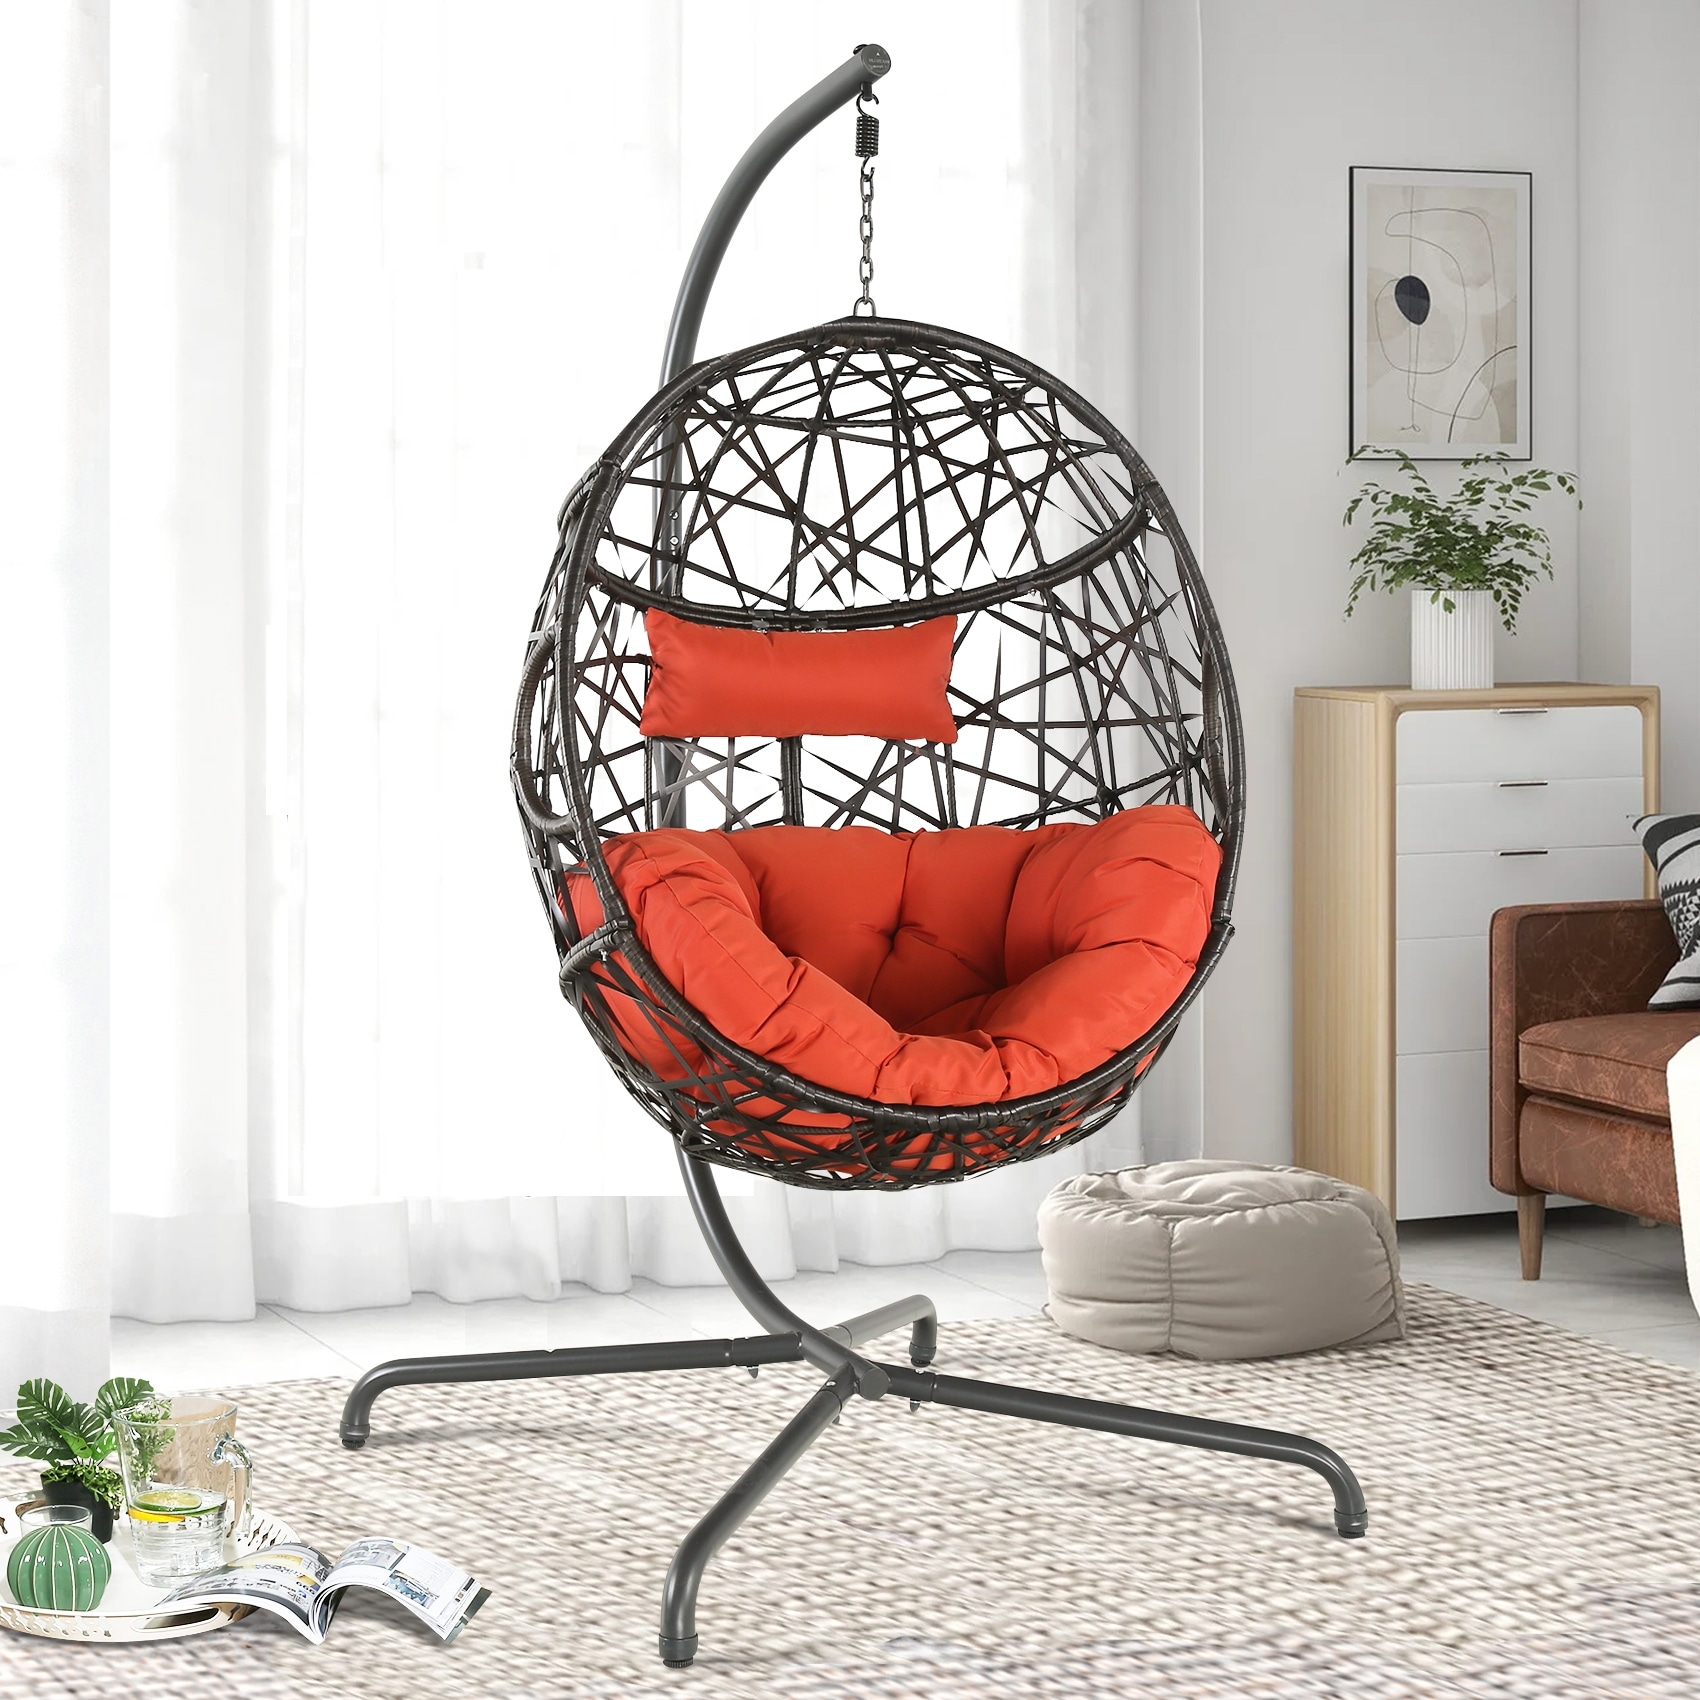 https://ak1.ostkcdn.com/images/products/is/images/direct/eff5fa118485e2d17bdec3dcb8c2a6b0fc4f218e/Hanging-Egg-Chair-Rattan-Hammock-Basket-Chair-with-Stand.jpg